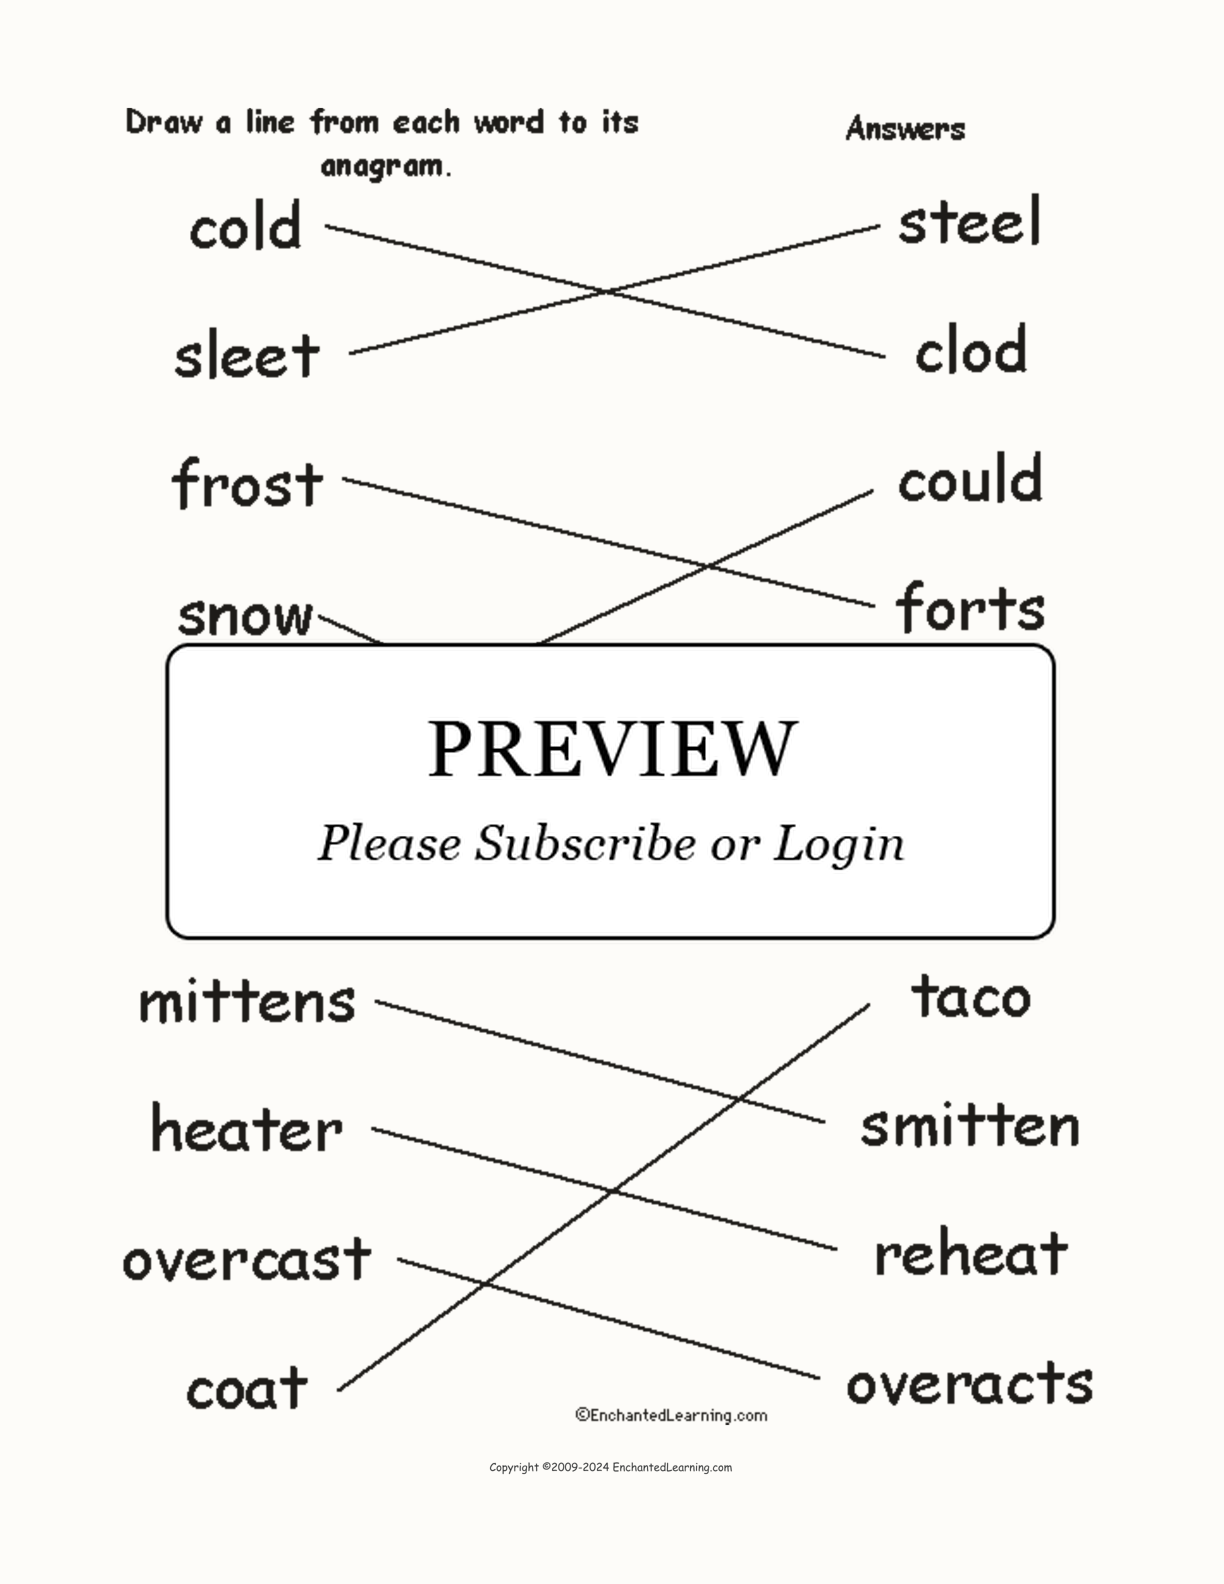 match-the-winter-anagrams-enchanted-learning